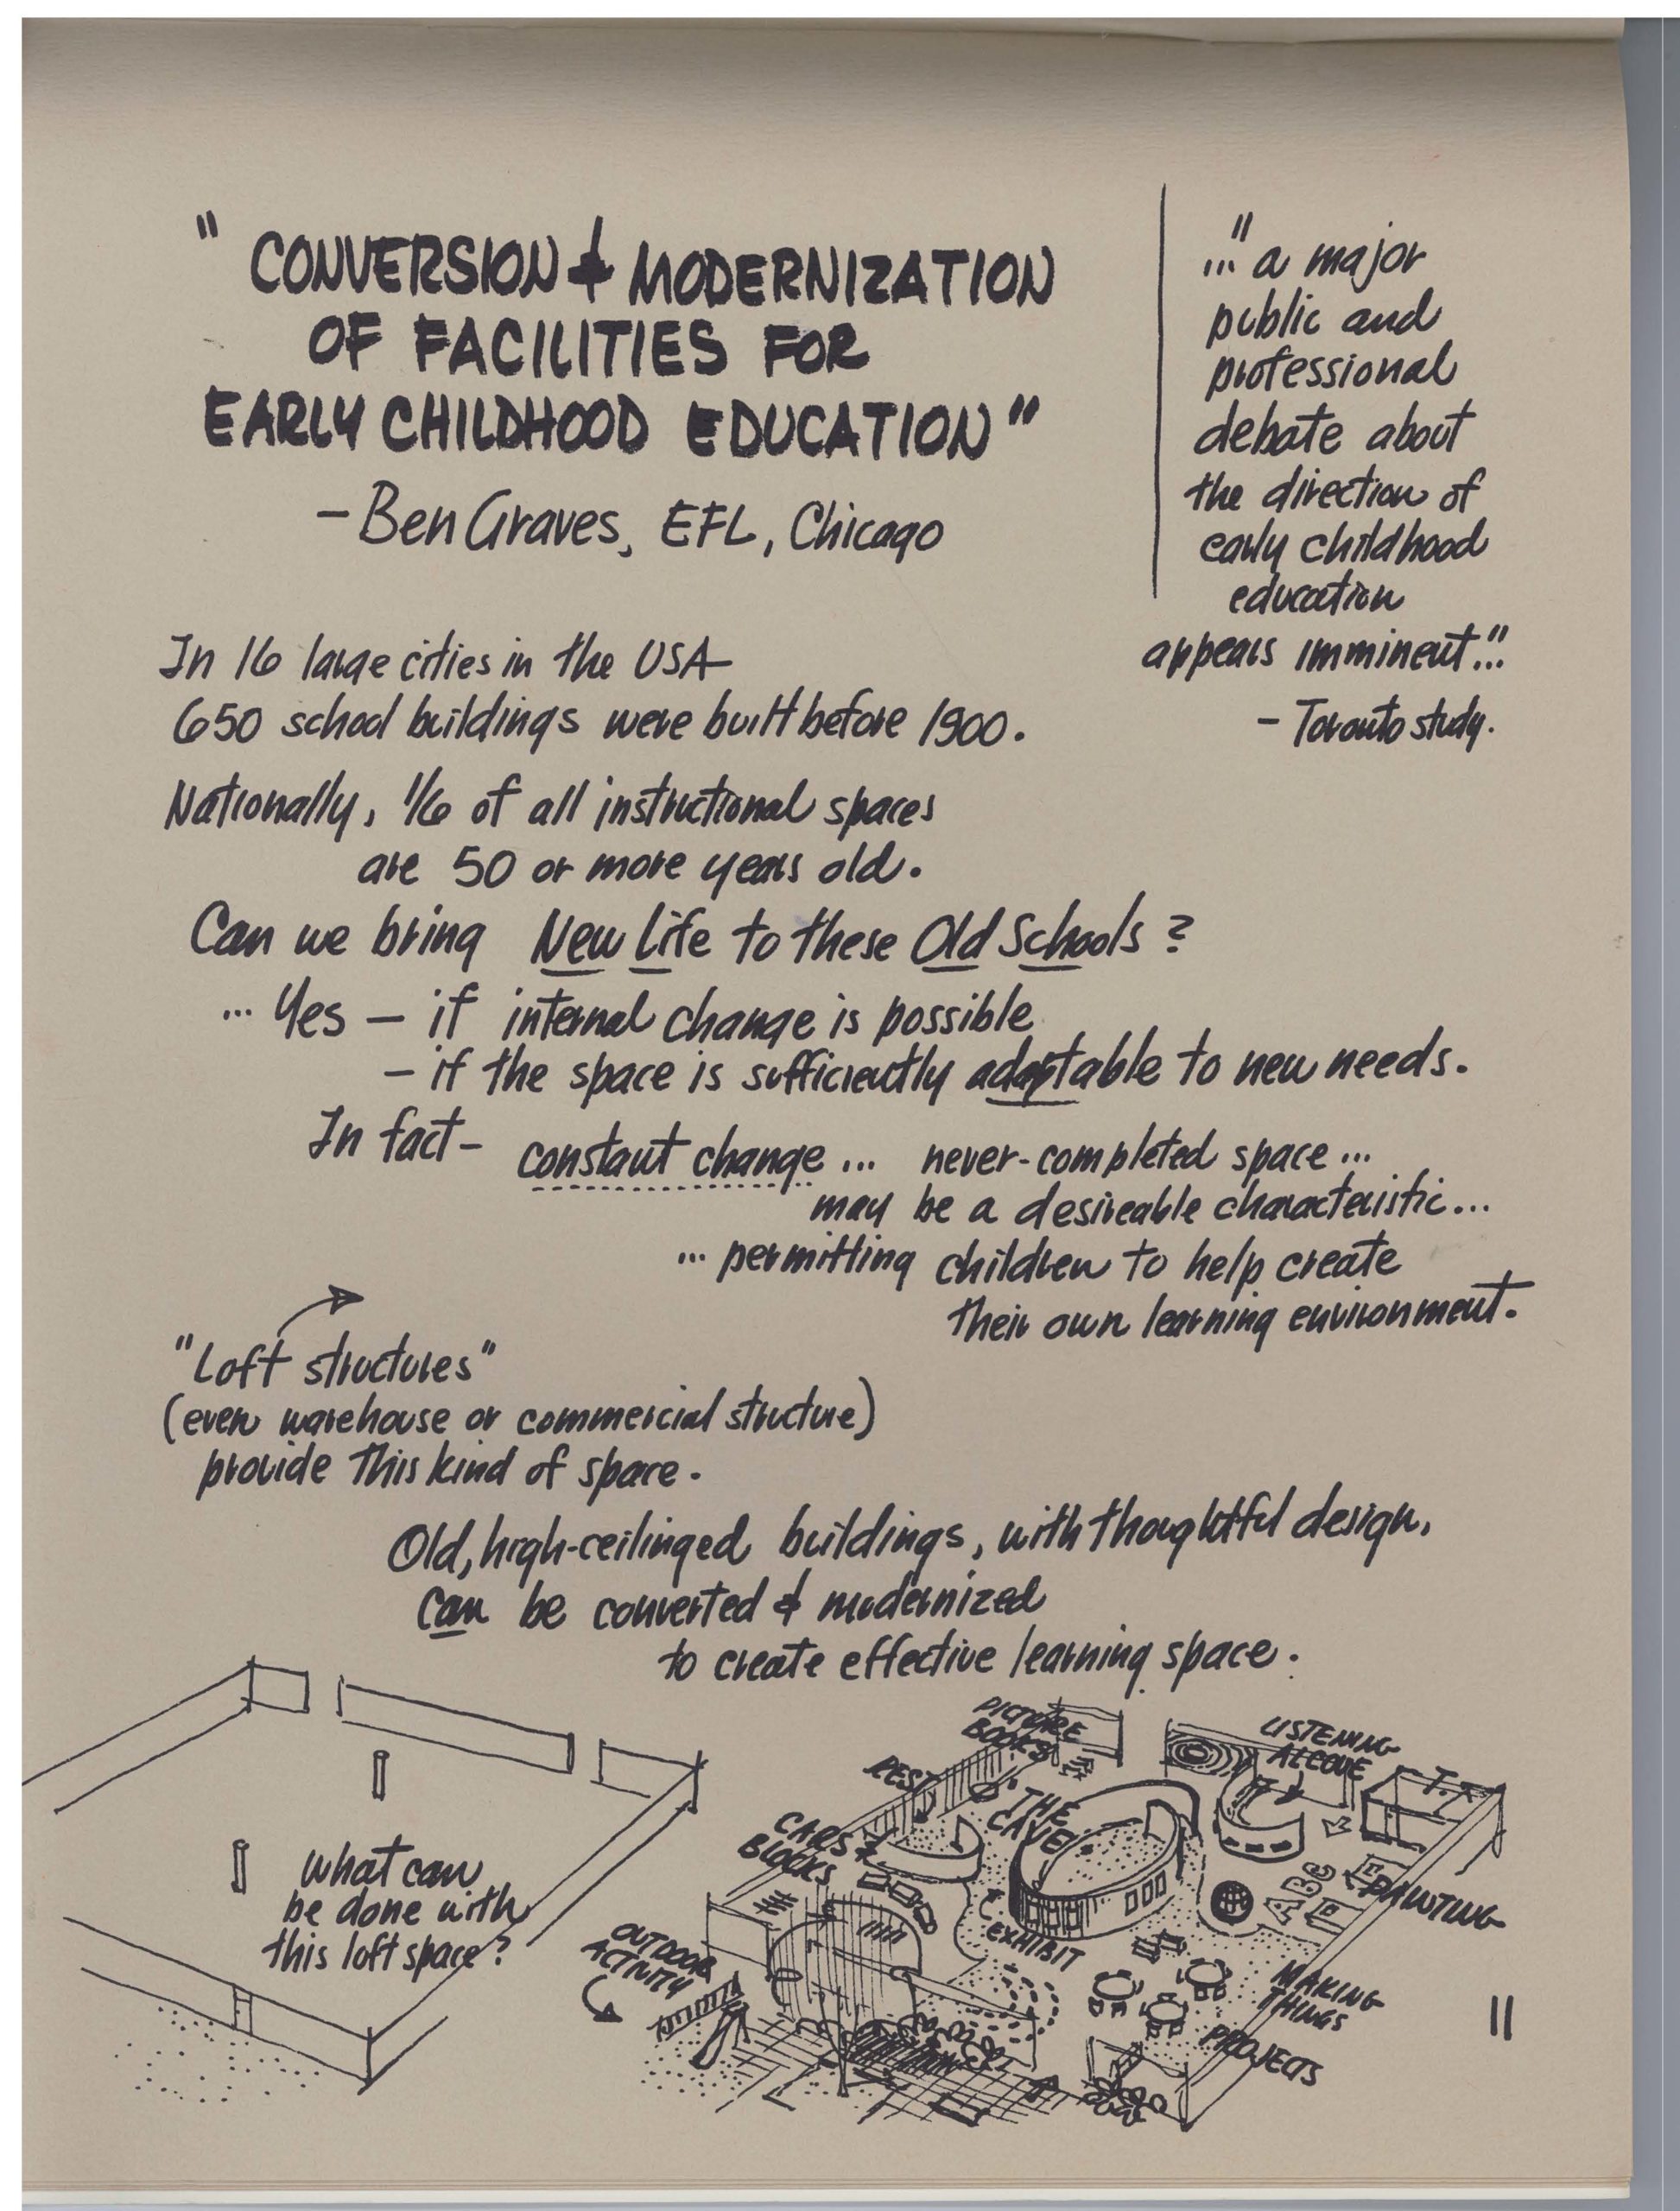 Planning and Development of Facilities for PrePrimary Education_Brubaker Conference Summary Sketchbook 1969_Page_12